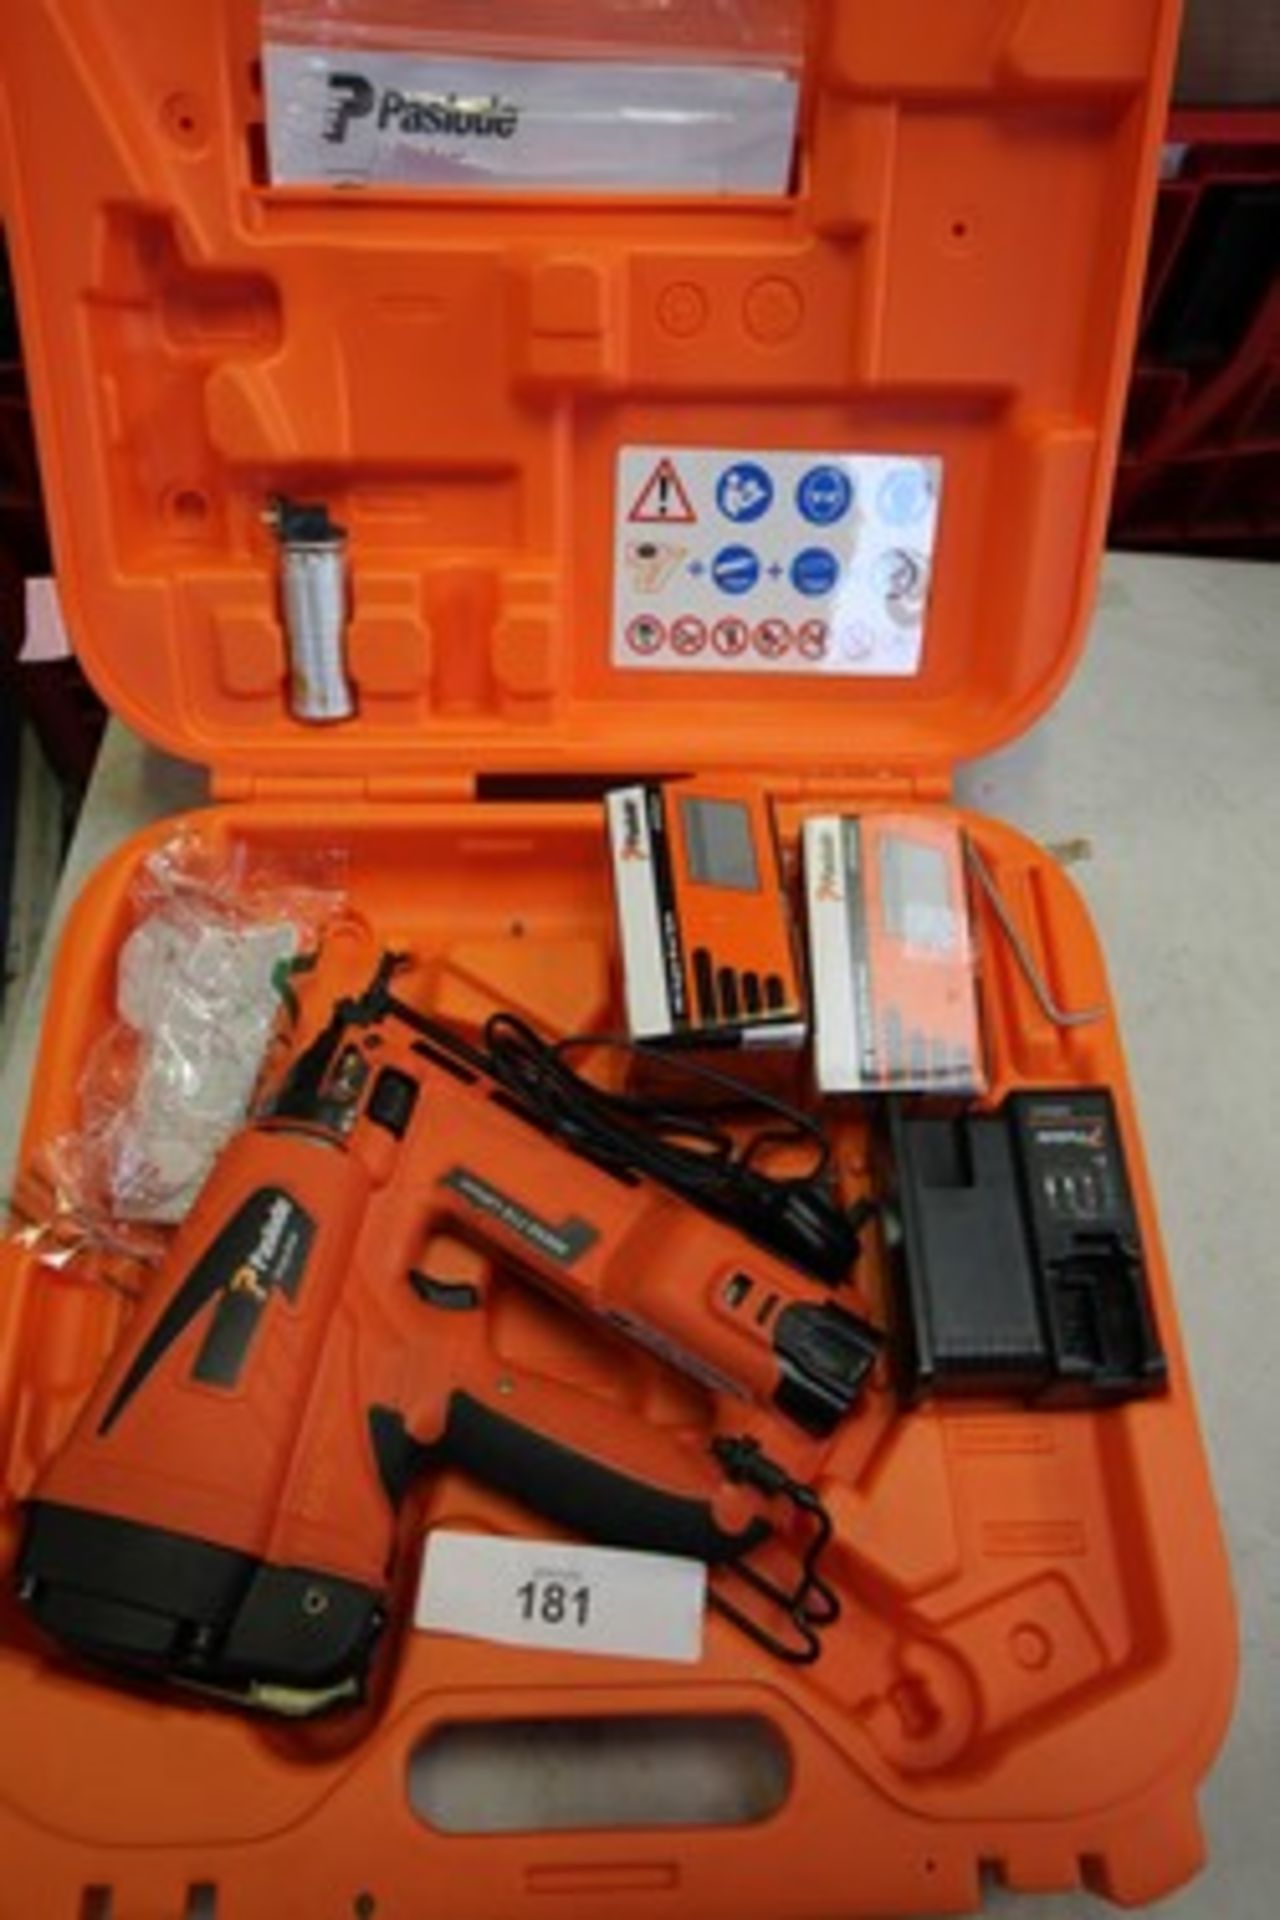 1 x Paslode impulse IM65A F16 Nail Gun with battery charger and case, Loose back plate mountings,